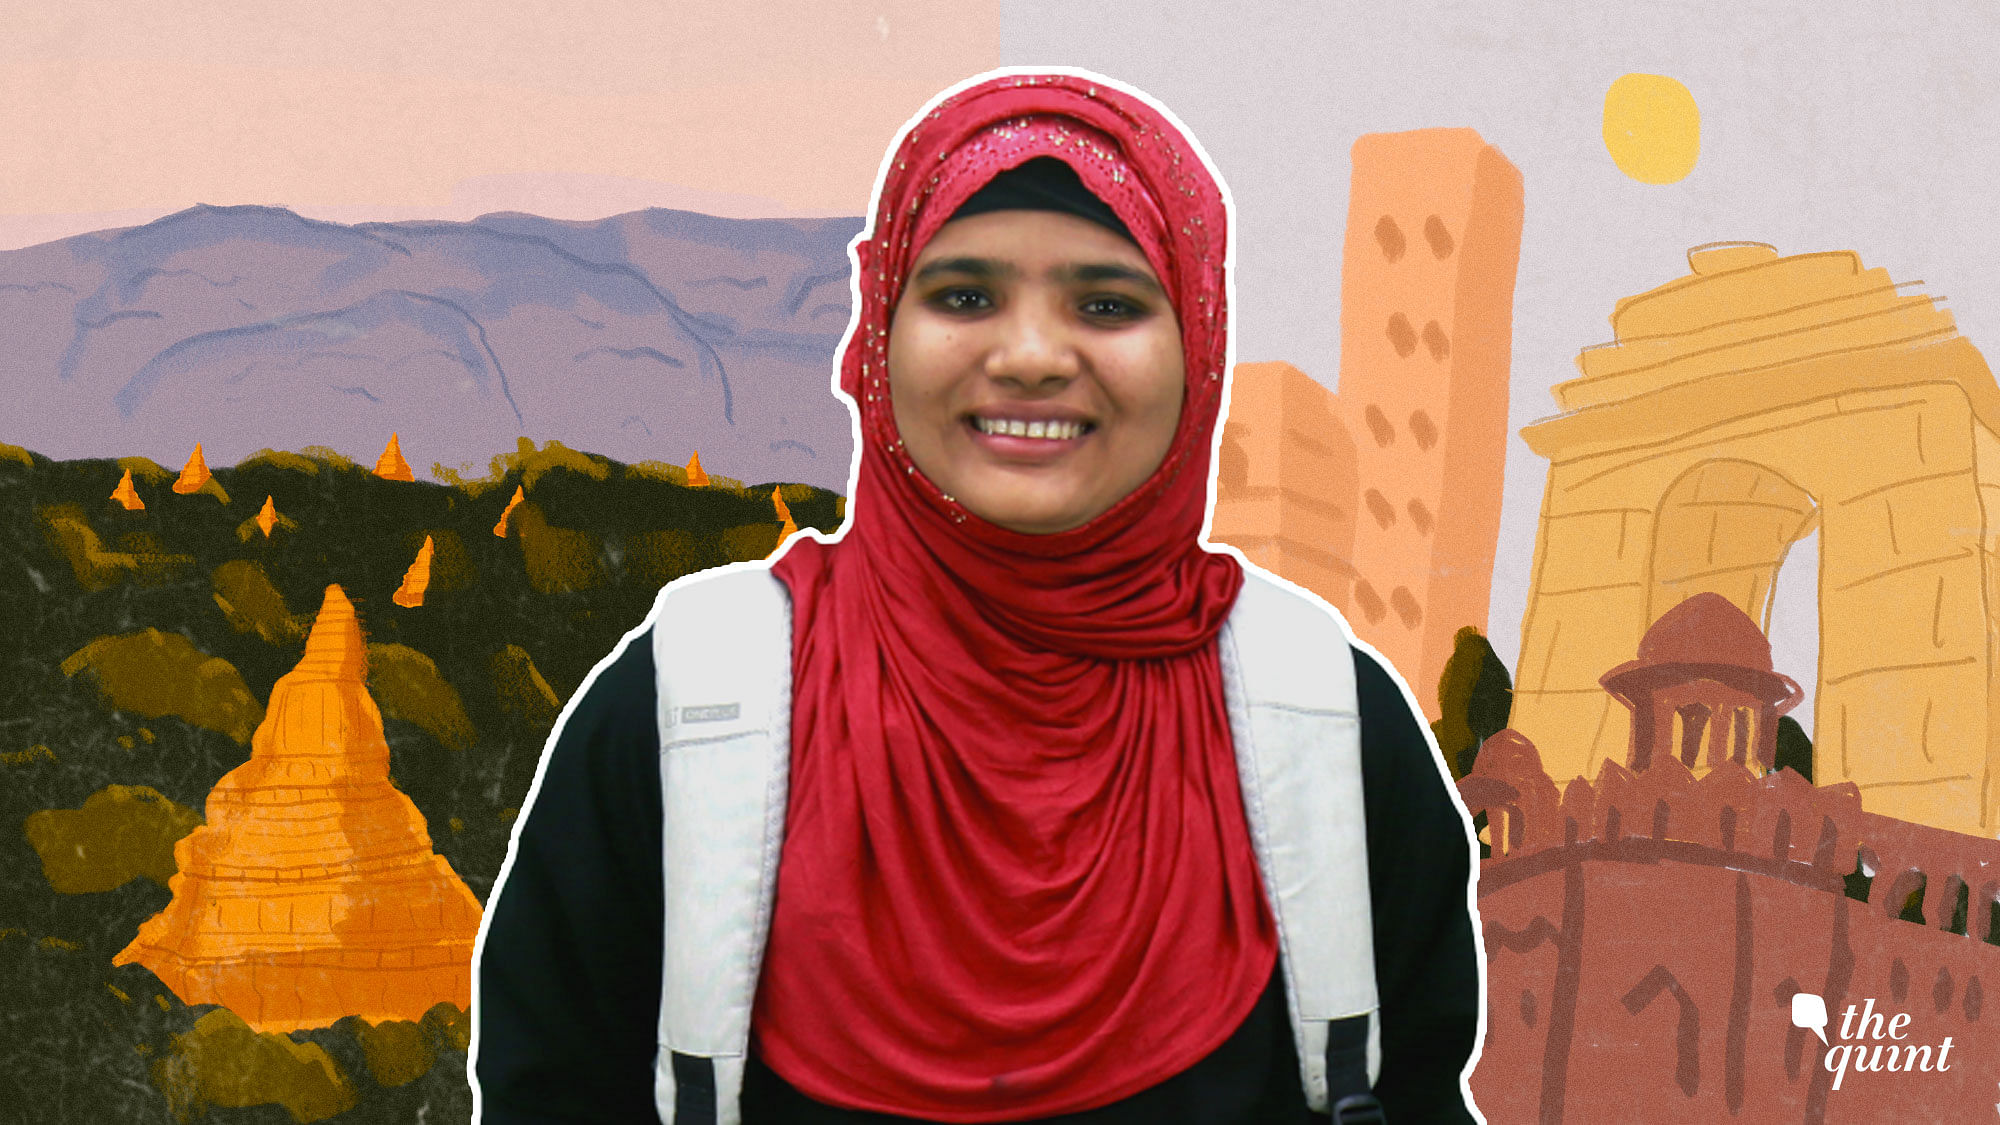 Tasmida is a Rohingya Muslim who has been living in India as a refugee since 2012. She will be the first girl from her community to enter college. &nbsp;